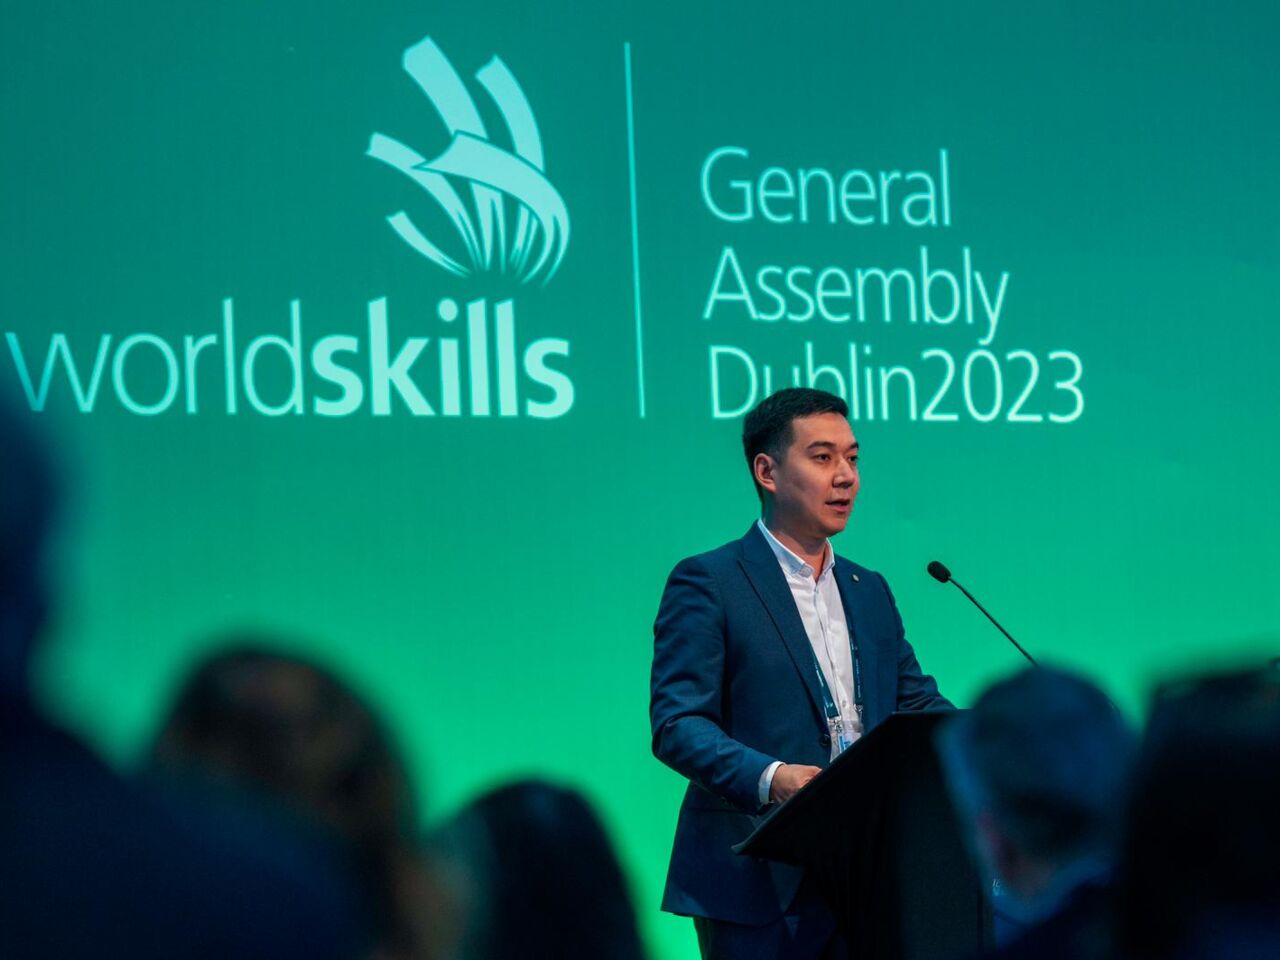 WorldSkills General Assembly 2023 welcomes Kyrgyzstan